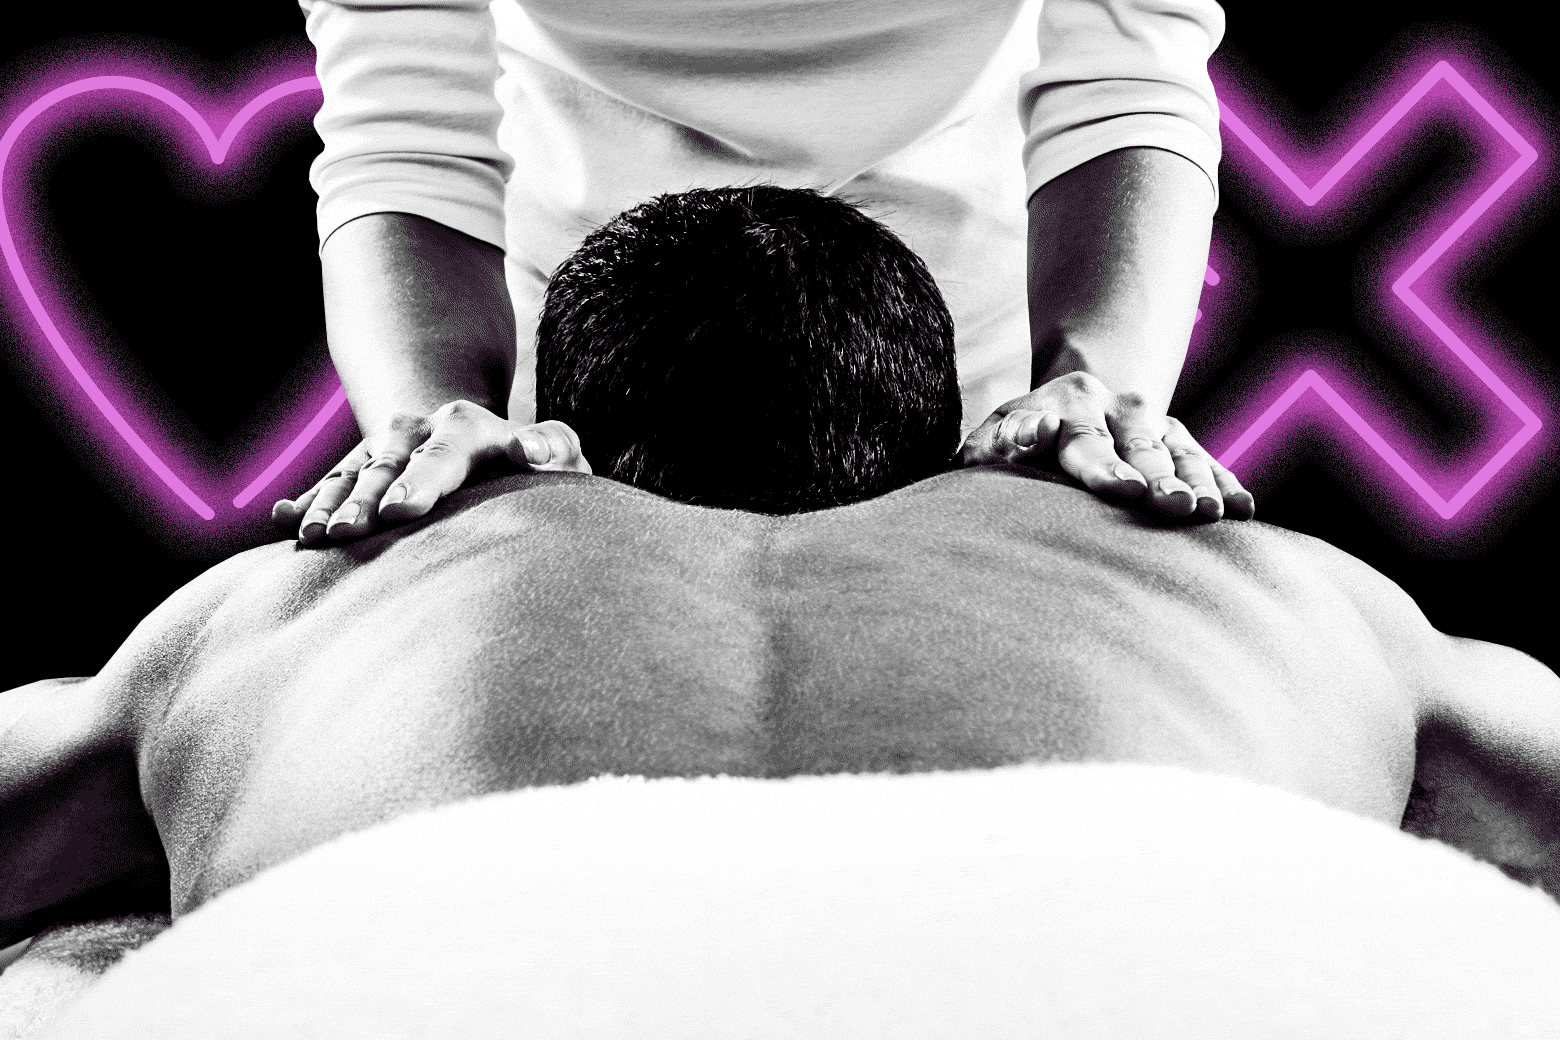 My wife shut down our sex life—is it wrong I go to massage parlors instead? pic